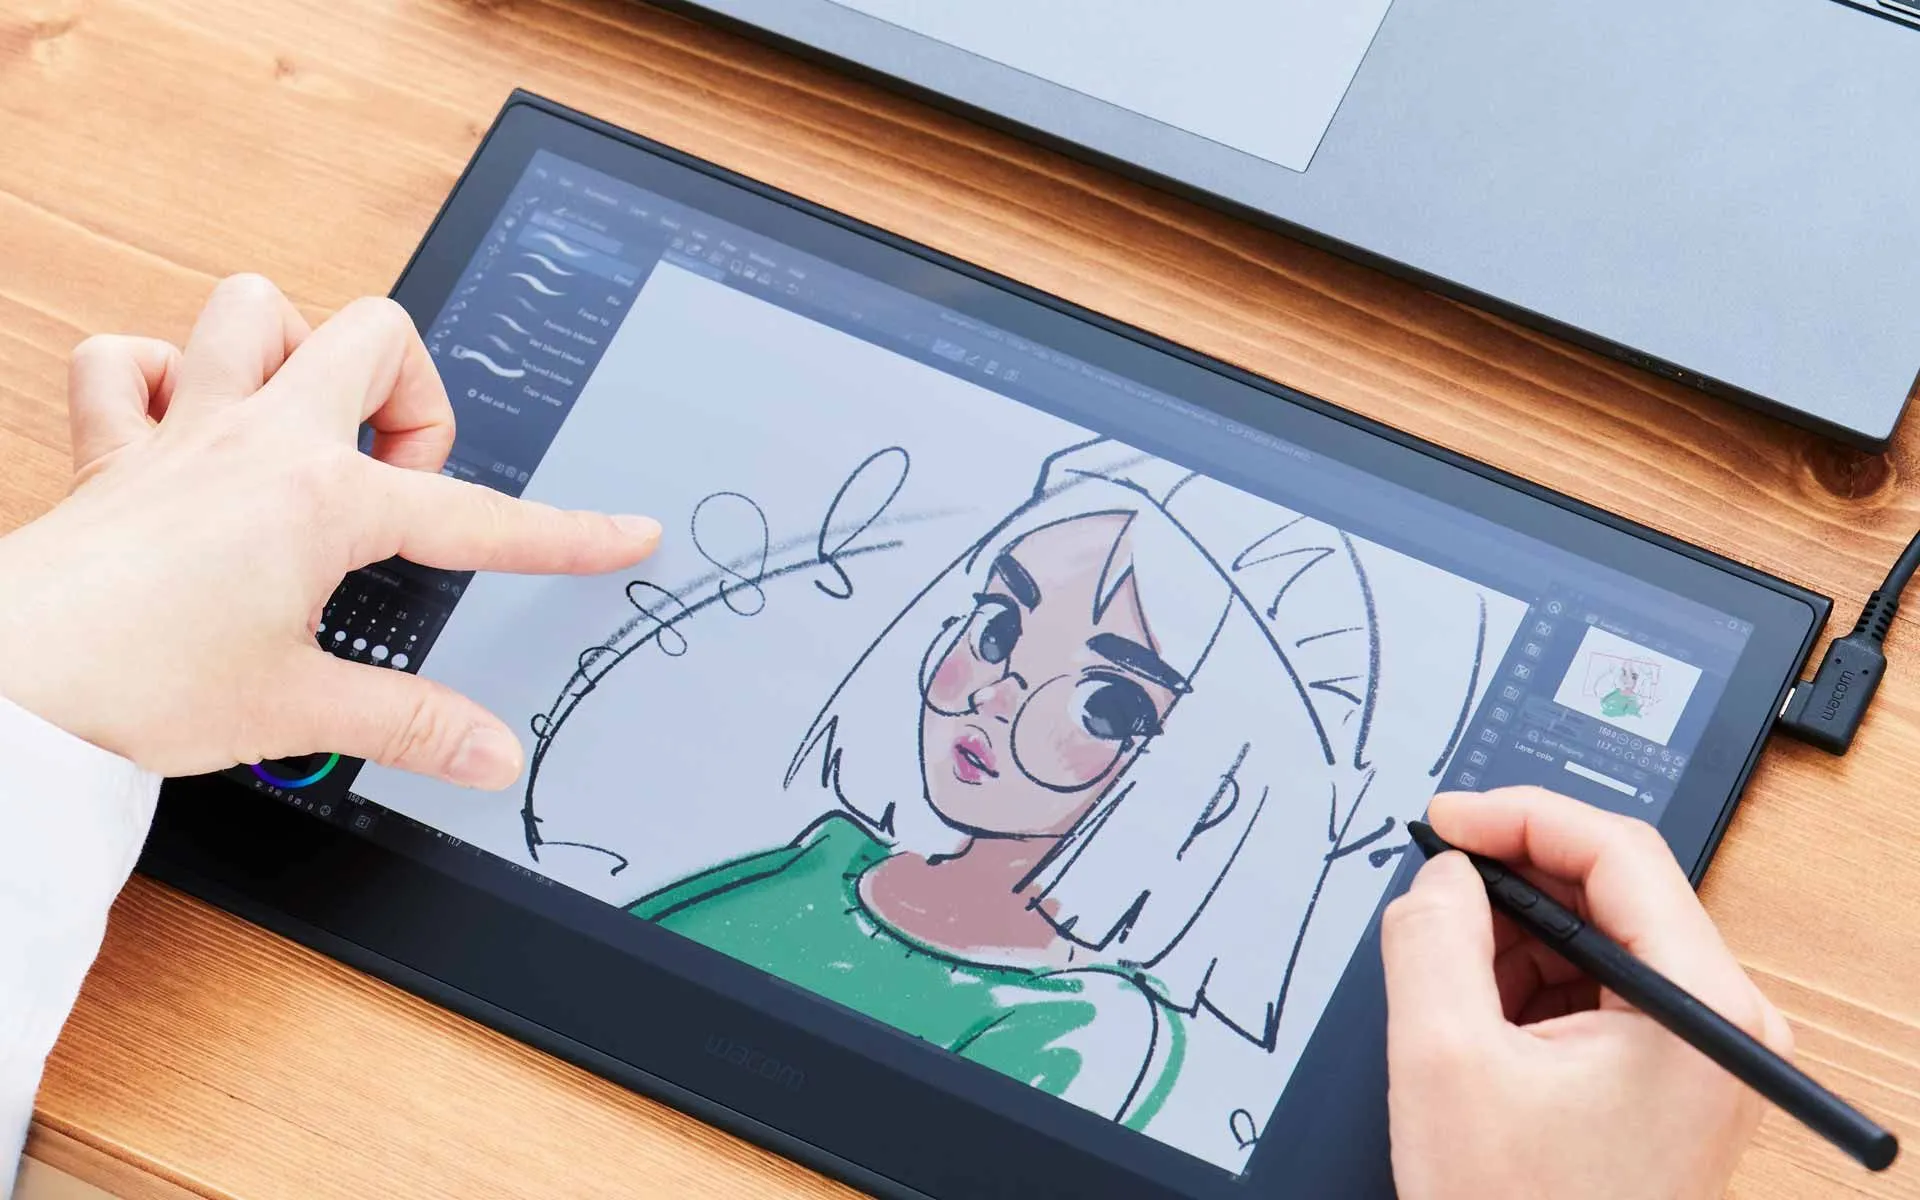 A person uses a stylus on a digital drawing tablet to create a colorful illustration of a female character, with a laptop and papers visible on a wooden desk.